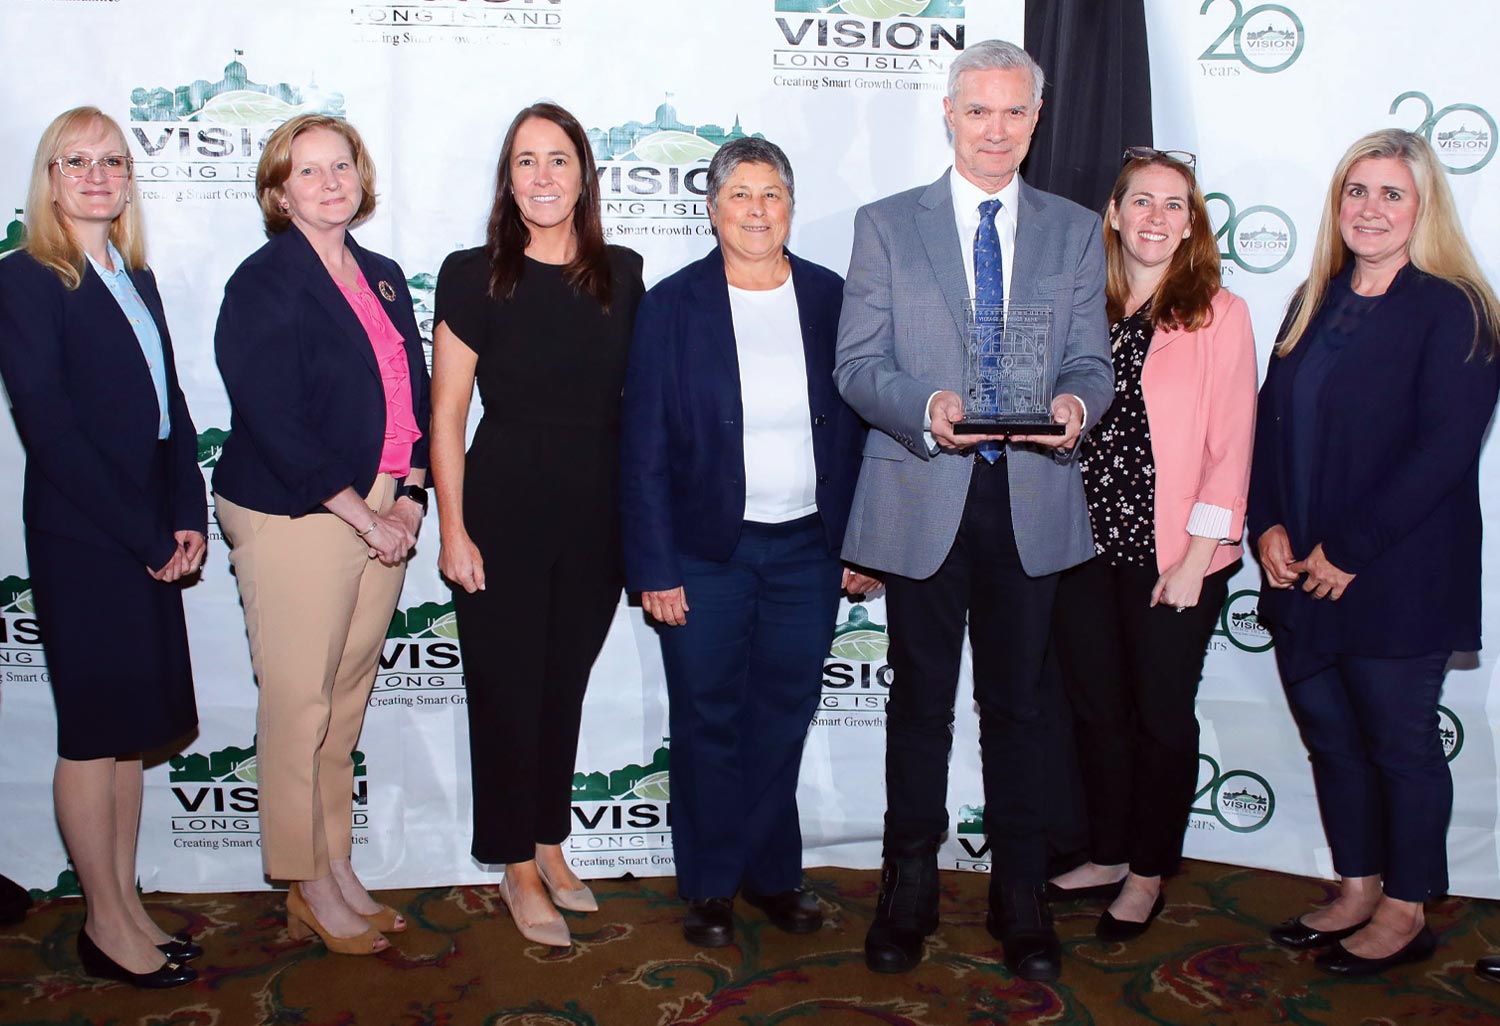 SJNY President Donald R. Boomgaarden, Ph.D. holds the the 2023 Long Island Smart Growth Award for Community Leadership while standing with St. Joseph’s administrators (from left) Heather Barry, Ph.D.; Rory Shaffer-Walsh; Christine Murphy; Gail Lamberta ’82, Ph.D.; Jessica McAleer Decatur; and Michelle Papajohn ’08, MBA ’10, M.S. ’23